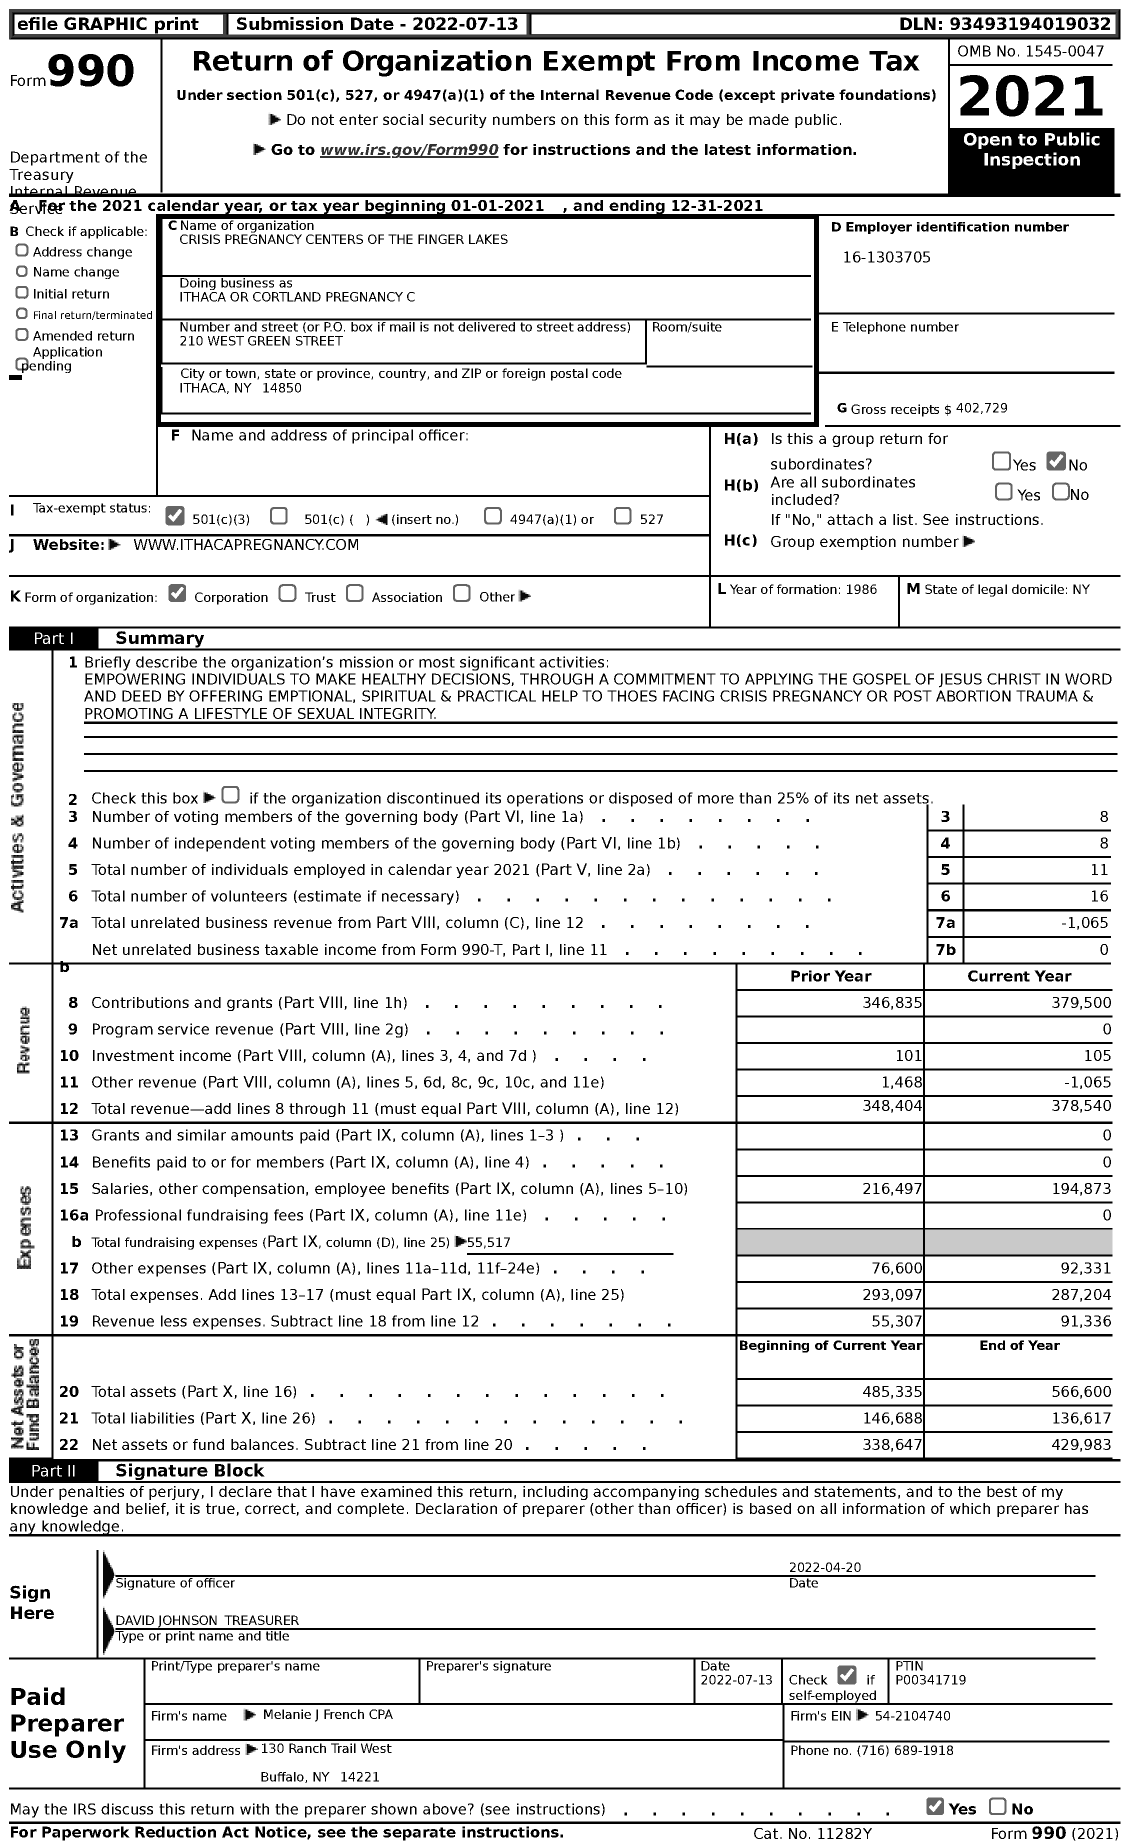 Image of first page of 2021 Form 990 for Ithaca Or Cortland Pregnancy C